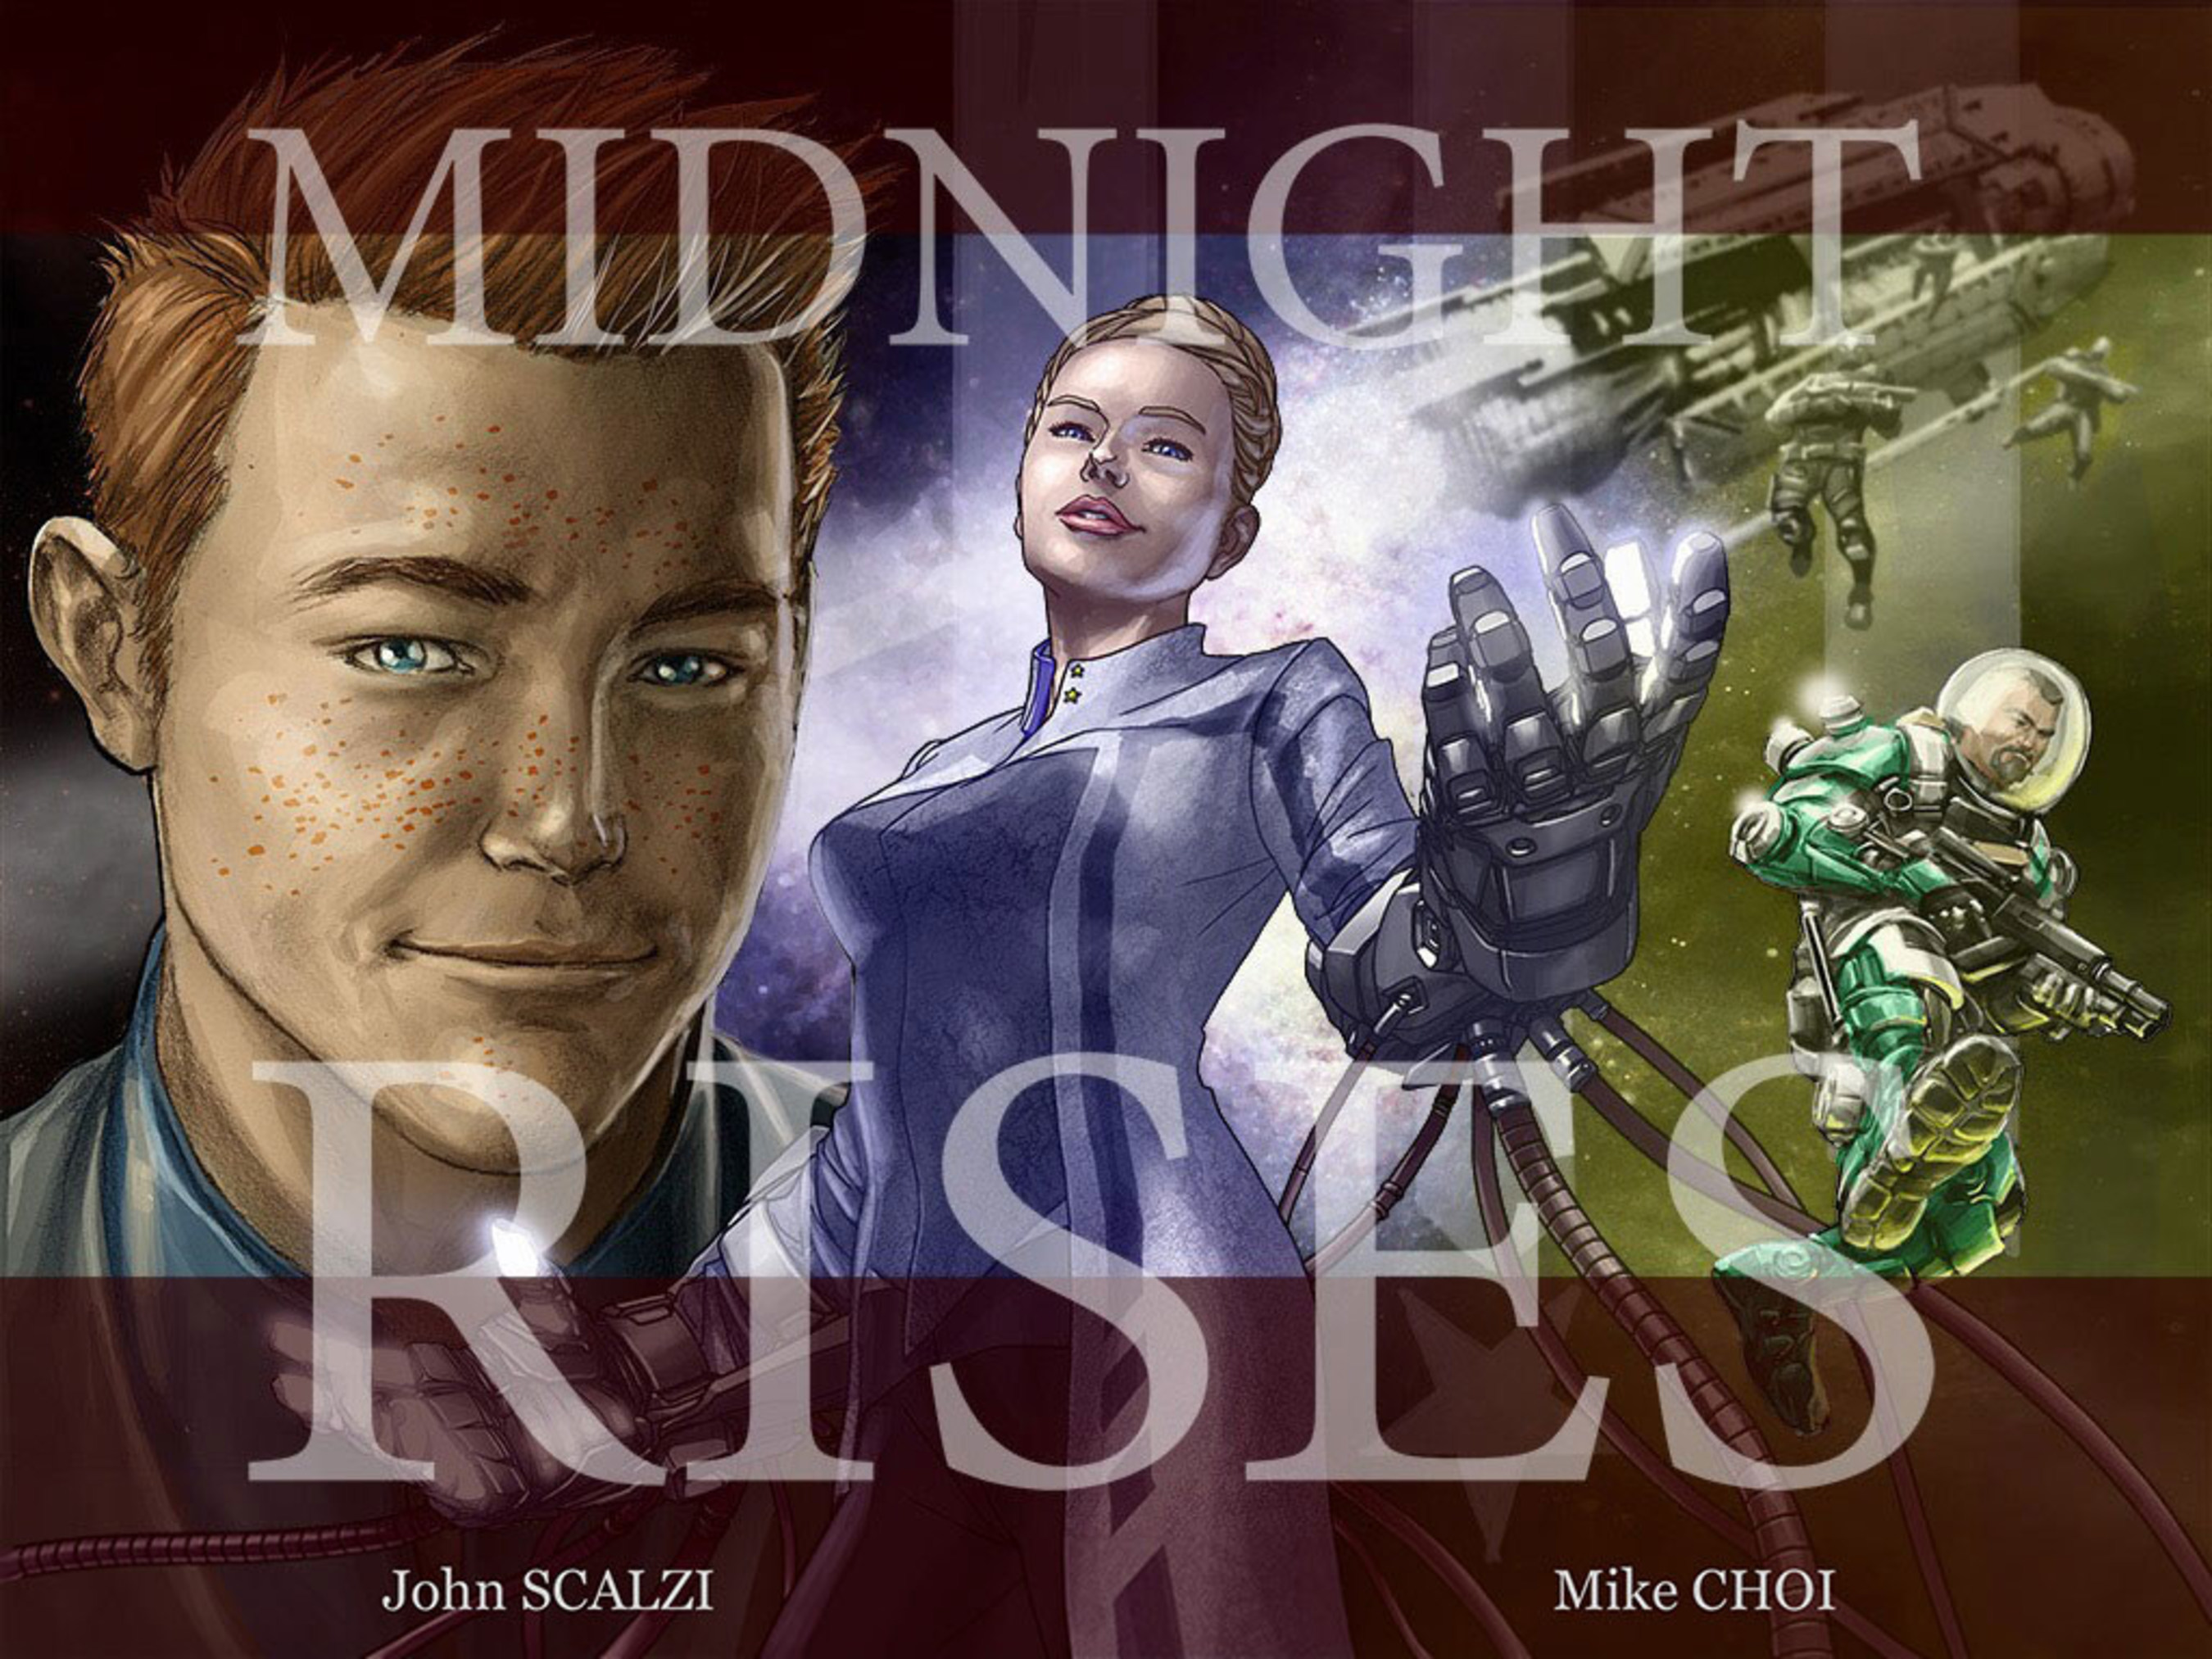 Midnight Rises Cover by Mike Choi